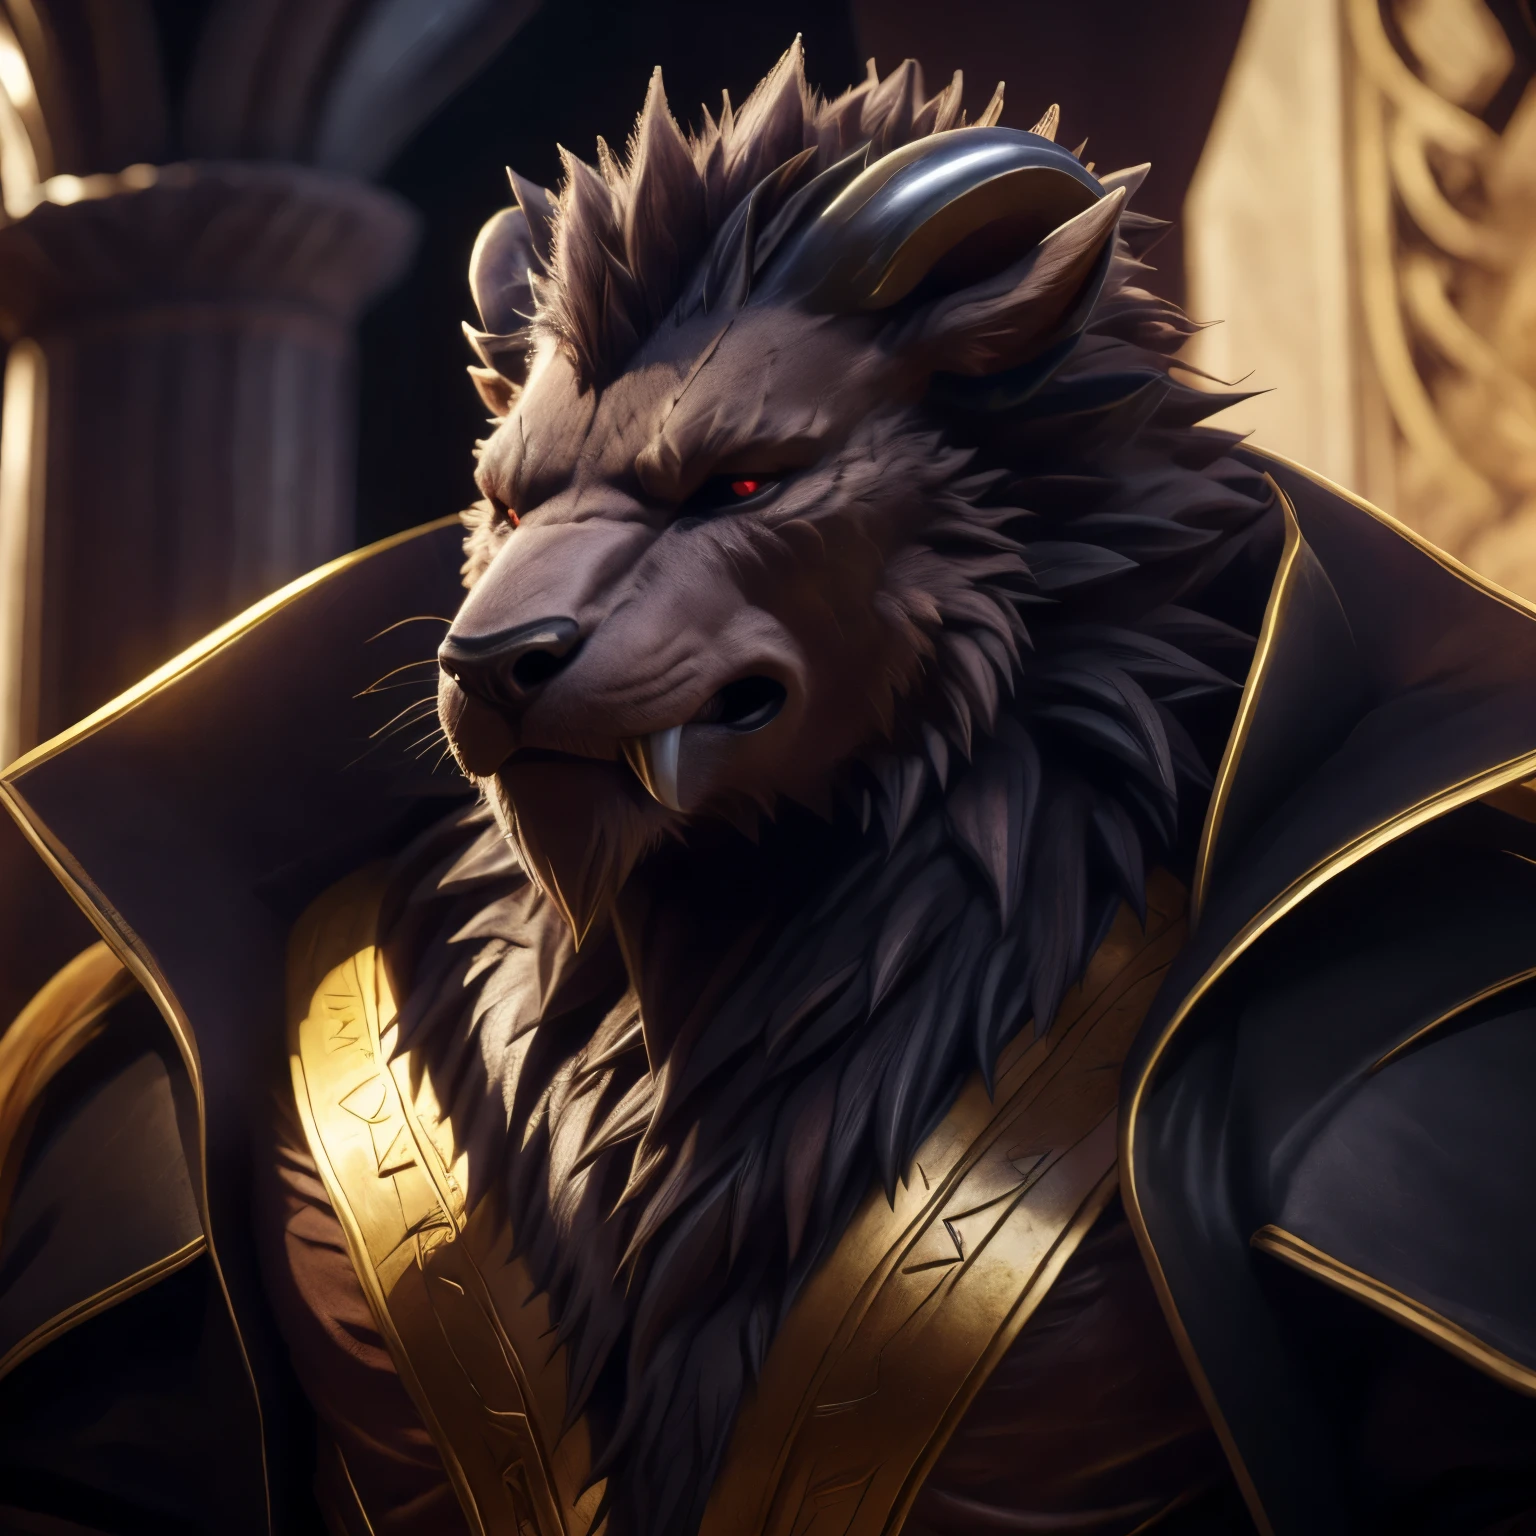 (highest quality, 32K High resolution:1.2, Very detailed, Realistic, photoRealistic, masterpiece,) Official Art, The Sacrificed Princess and the King of Beasts, Full Body View, Looking at the audience, male, good looking, Majestic Beast, Dark sienna brown fur, Black Mane, Majestic King, King Leonhard, Muscular body, Crimson Eyes, Serious look , Small ears, Curved black horns, Long upper jaw crab teeth, (detailed Realistic image:1.3), (Fine grain, Beautiful and expressive eyes:1), (hyper Realistic fur:1.2), (Fur with attention to detail:1. ( Detailed face:1) Low Light: 1.2) masterpiece, highest quality, ultra Realistic ( 8k, 超High resolution, Beautiful light and shadow, Detailed faceの描写, highest quality, masterpiece, Ultra high definition, Official Art, Super detailed, Deep Shadow, Dynamic Shadows, High resolution, Profound, utra Fur with attention to detail, Maximum concentration, Depth of written boundary, Perfect lighting, Lightest particle quality, Super-detailed body, Cinematic, Sharp focus, Correct Anatomy, Right hand, The right move, Five fingers, Right Head, Detailed Background), (Intricate Details, Masterpiece, Best Quality, High Resolution, 8k), (1man), (male:1.2), old, aged up, exquisite face, angular jawline, finely detailed eyes and face, physique exudes strength and power, face portrait from an anthro male beast, RAW candid cinema, 16mm, color graded portra 400 film, remarkable color, ultra realistic, textured skin, remarkable detailed pupils, realistic dull skin noise, visible skin detail, skin fuzz, dry skin, shot with cinematic camera, high quality photography, 3 point lighting, flash with softbox, 4k, Canon EOS R3, hdr, smooth, sharp focus, high resolution, award winning photo, 80mm, f2.8, bokeh, face close